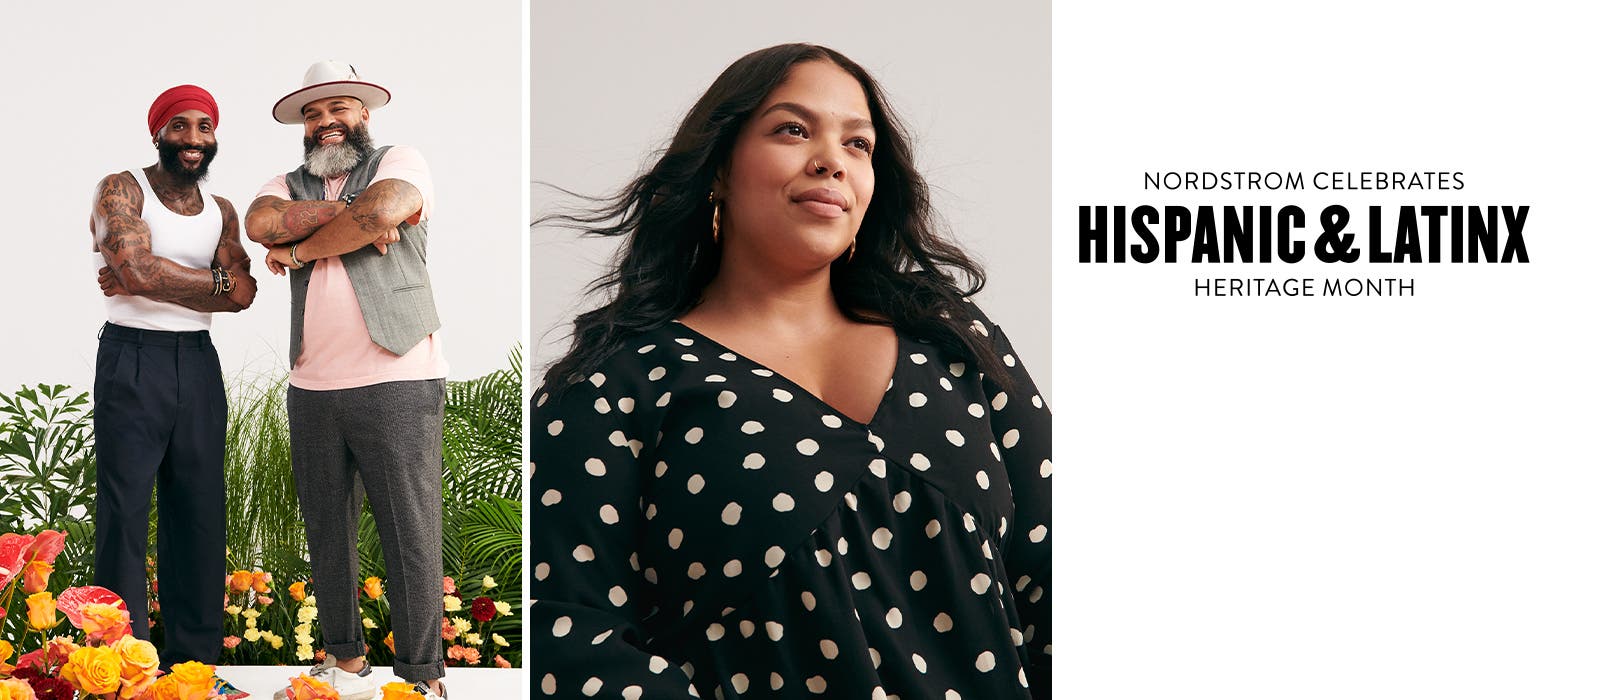 Nordstrom celebrates Hispanic and Latinx Heritage Month. Nordstrom employees against a vibrant backdrop of greenery and flowers.